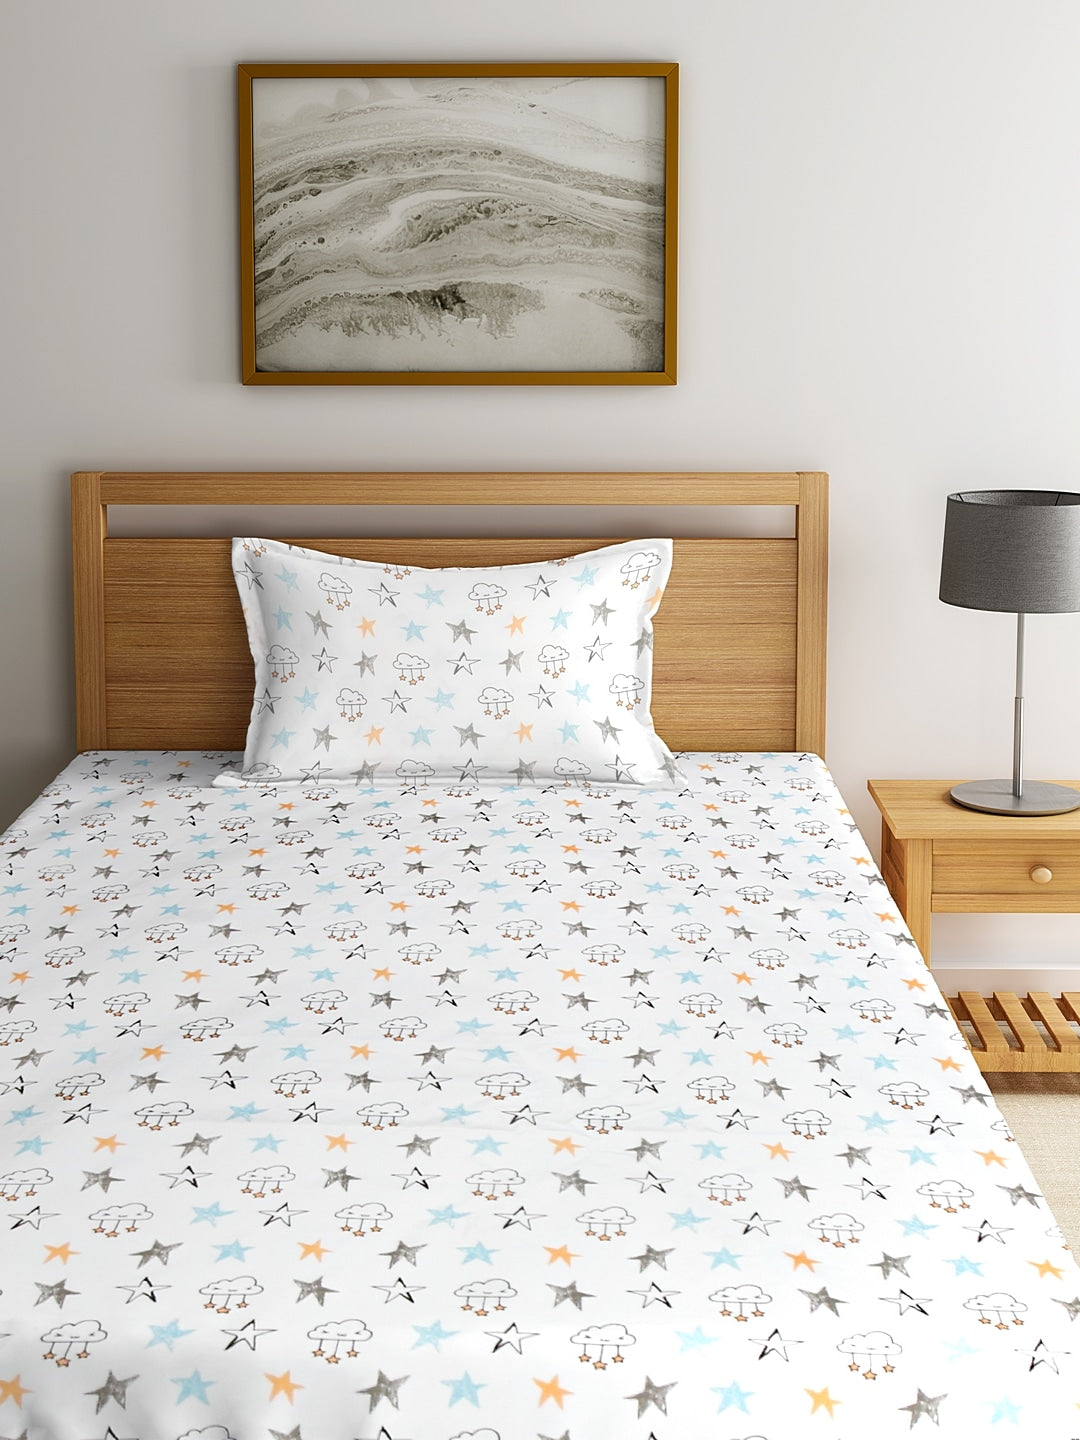 Blanc9 Starry Nights Kids Bedsheet with Pillow Case